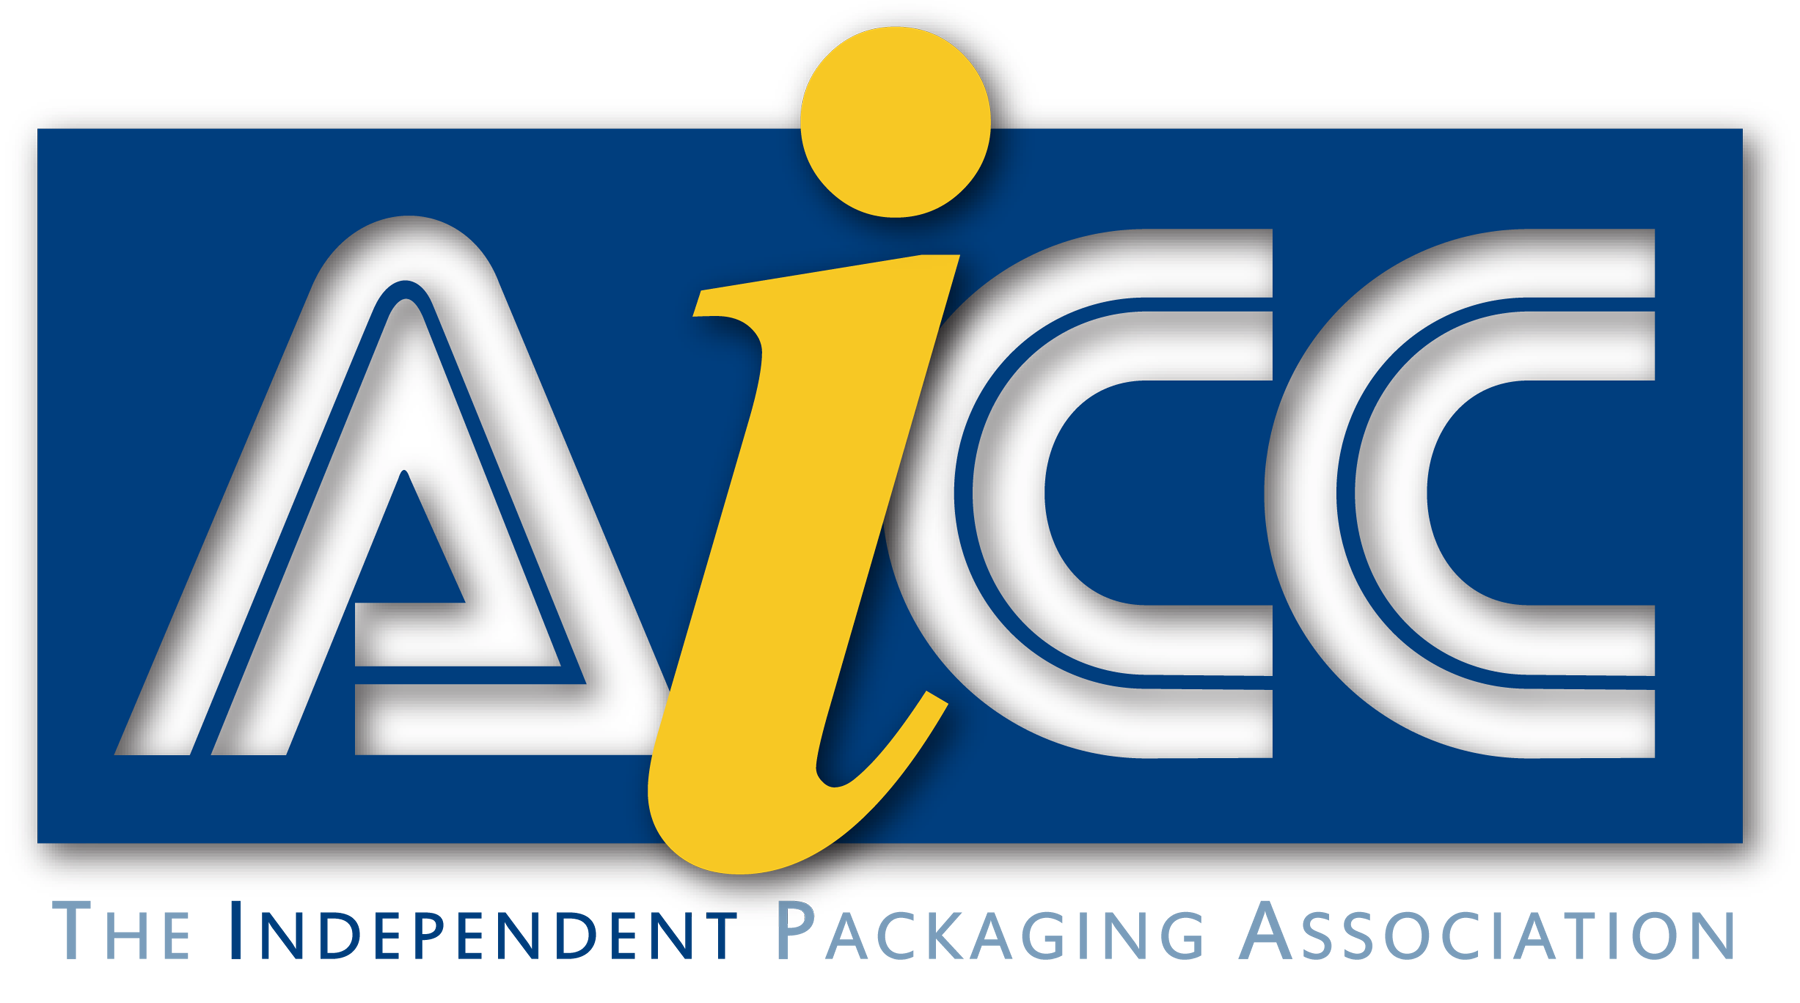 You are currently viewing Durst Imaging Technology Attends AICC Spring Packaging Meeting 2018